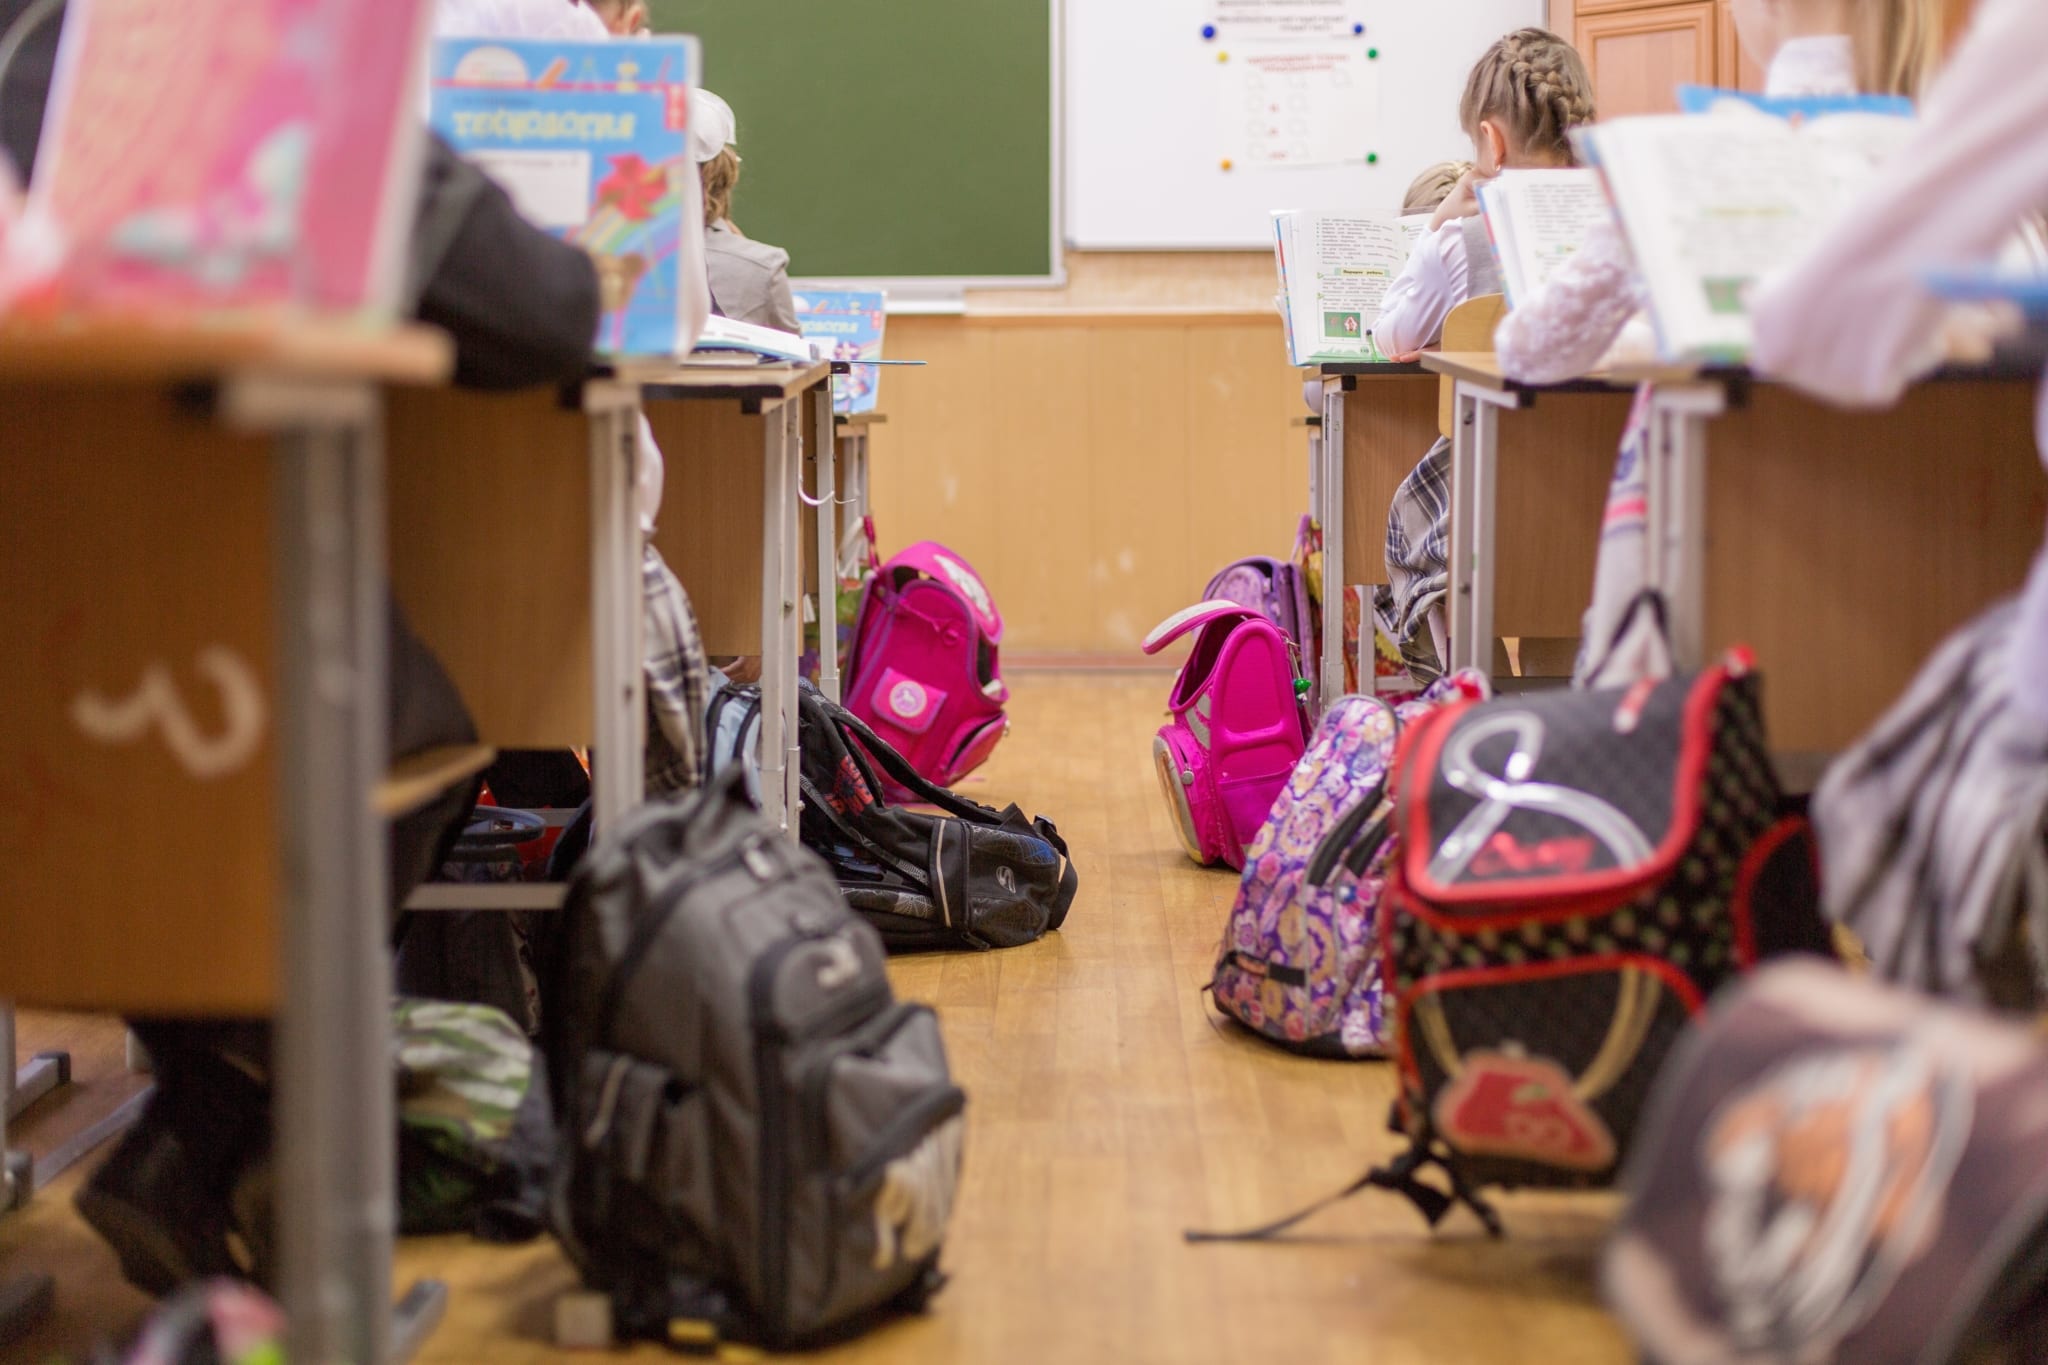 Backpacks lying next to desks in a classroom